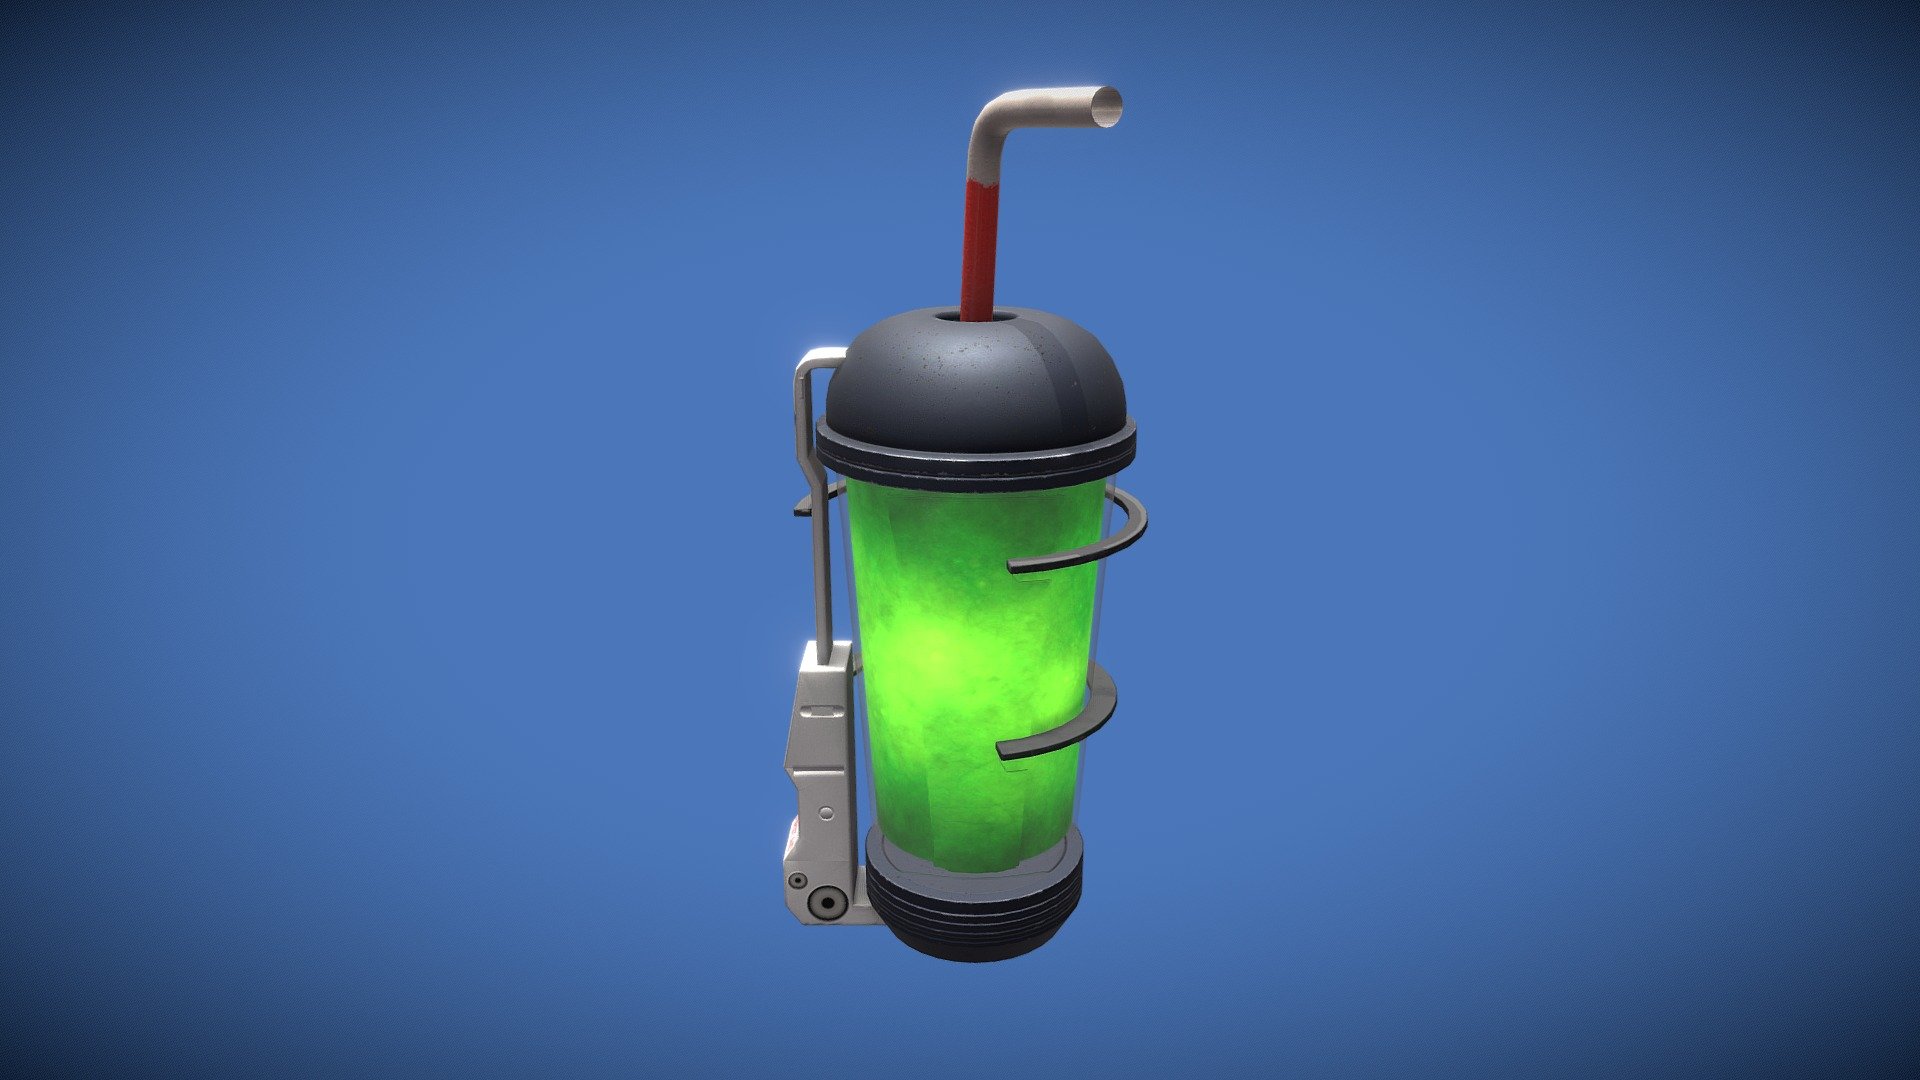 Remake of an old model.
The concept was mixing a Half-Life health kit vial with a bubble tea cup 3d model